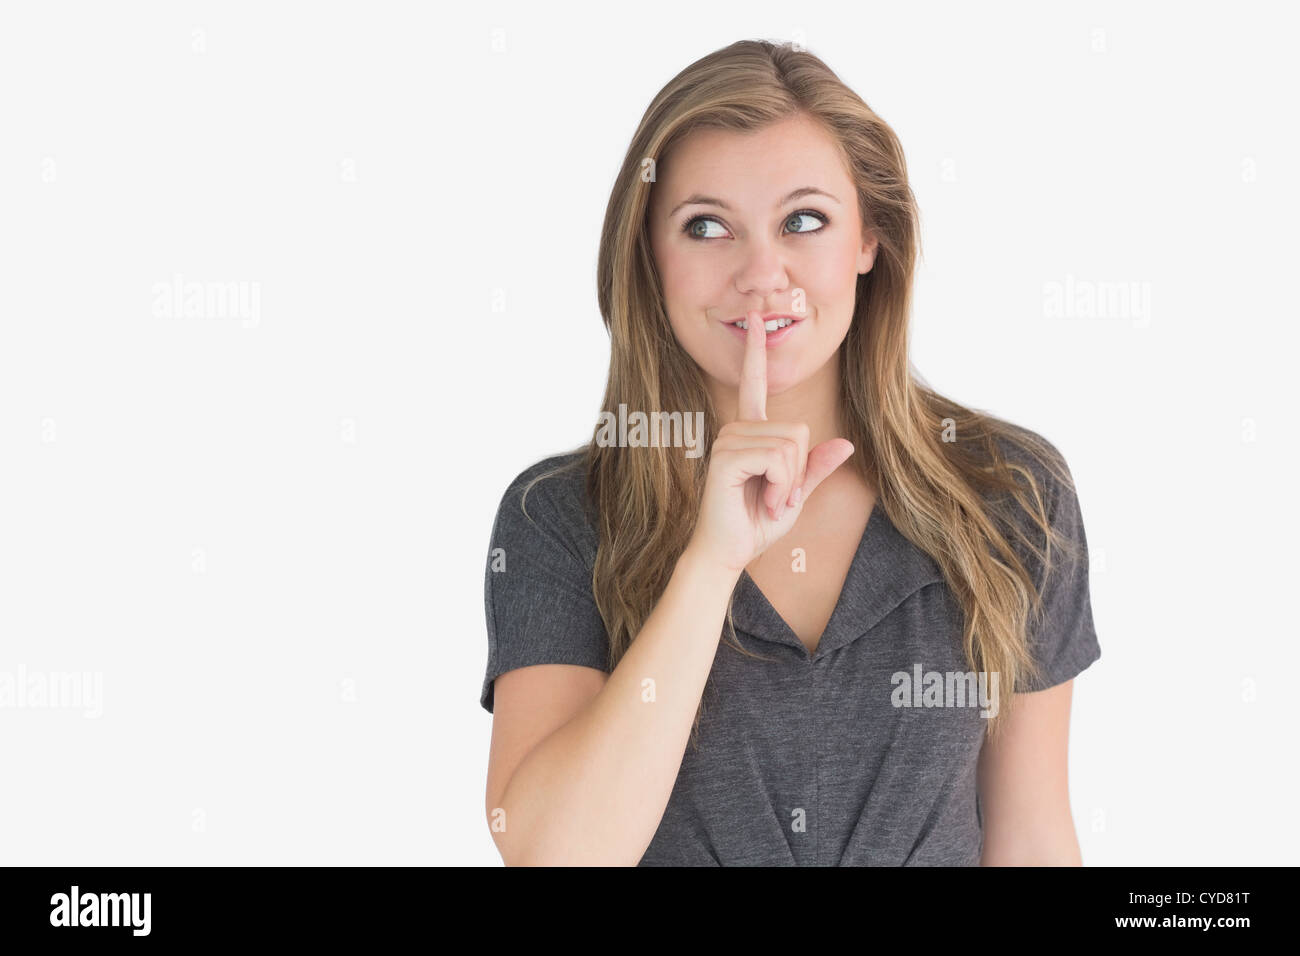 Woman making quiet sign Stock Photo